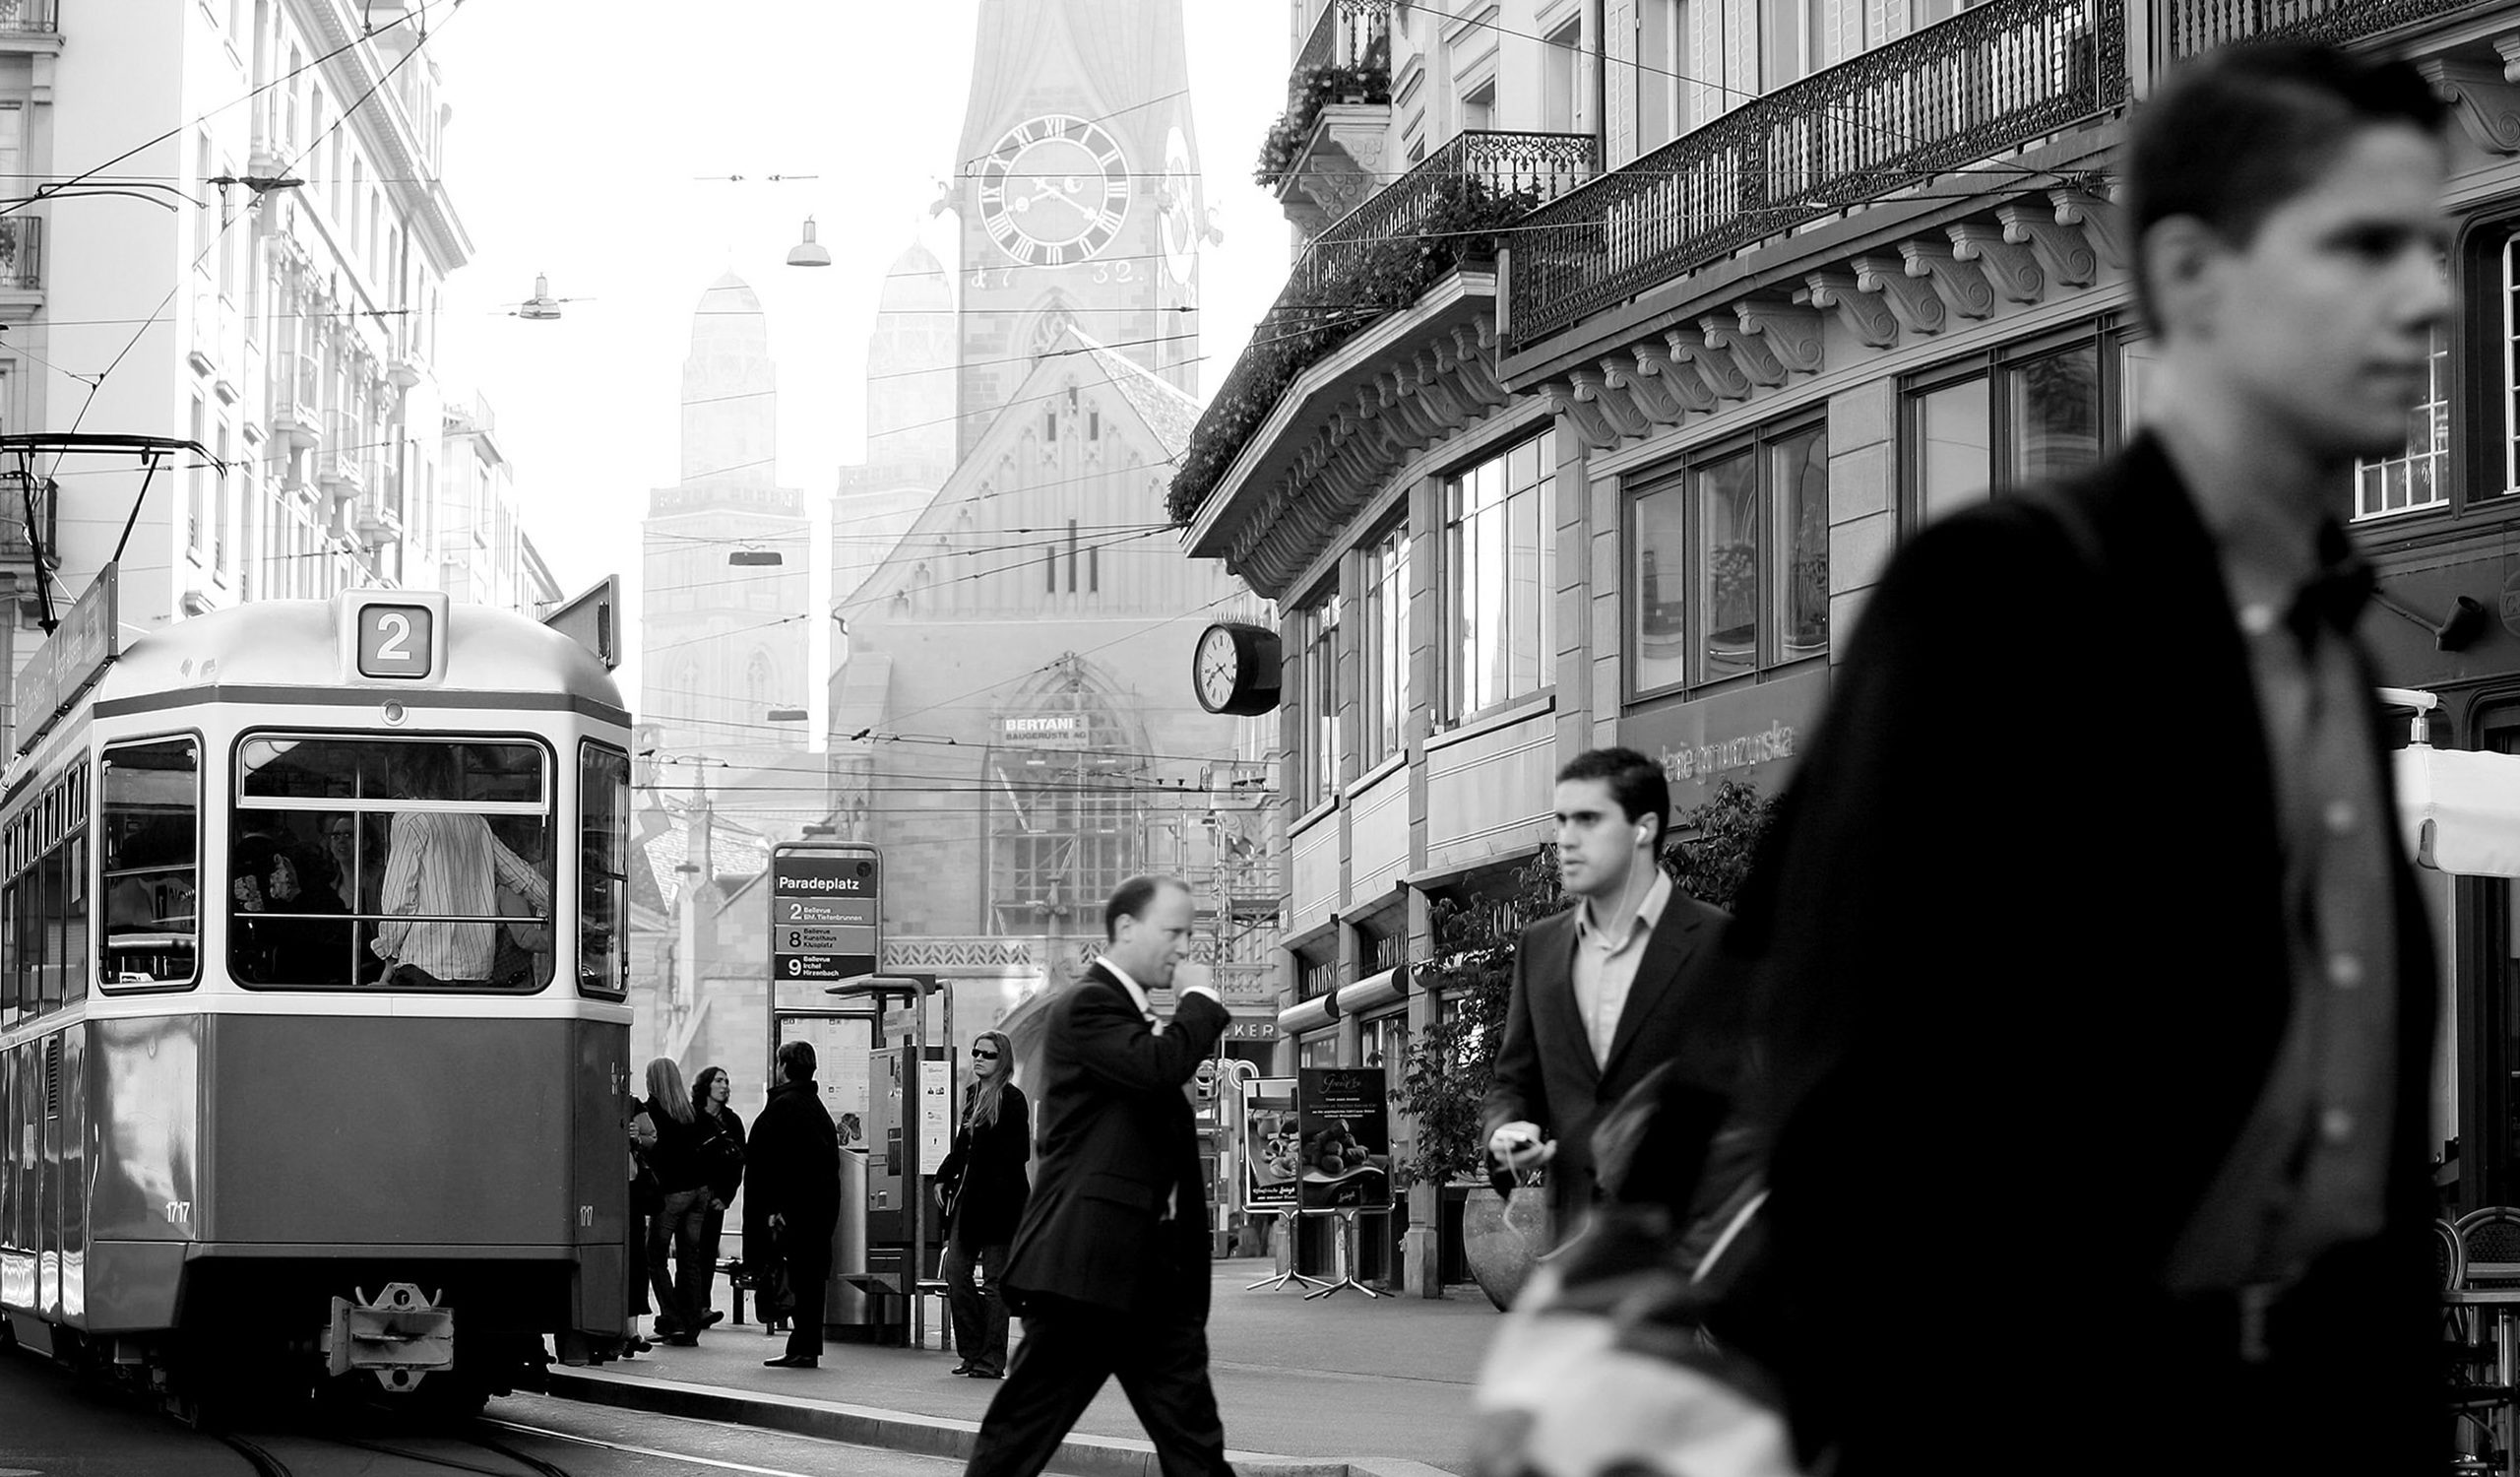 Zurich's Paradeplatz. Business people on the way to work. Photography Justin Hession